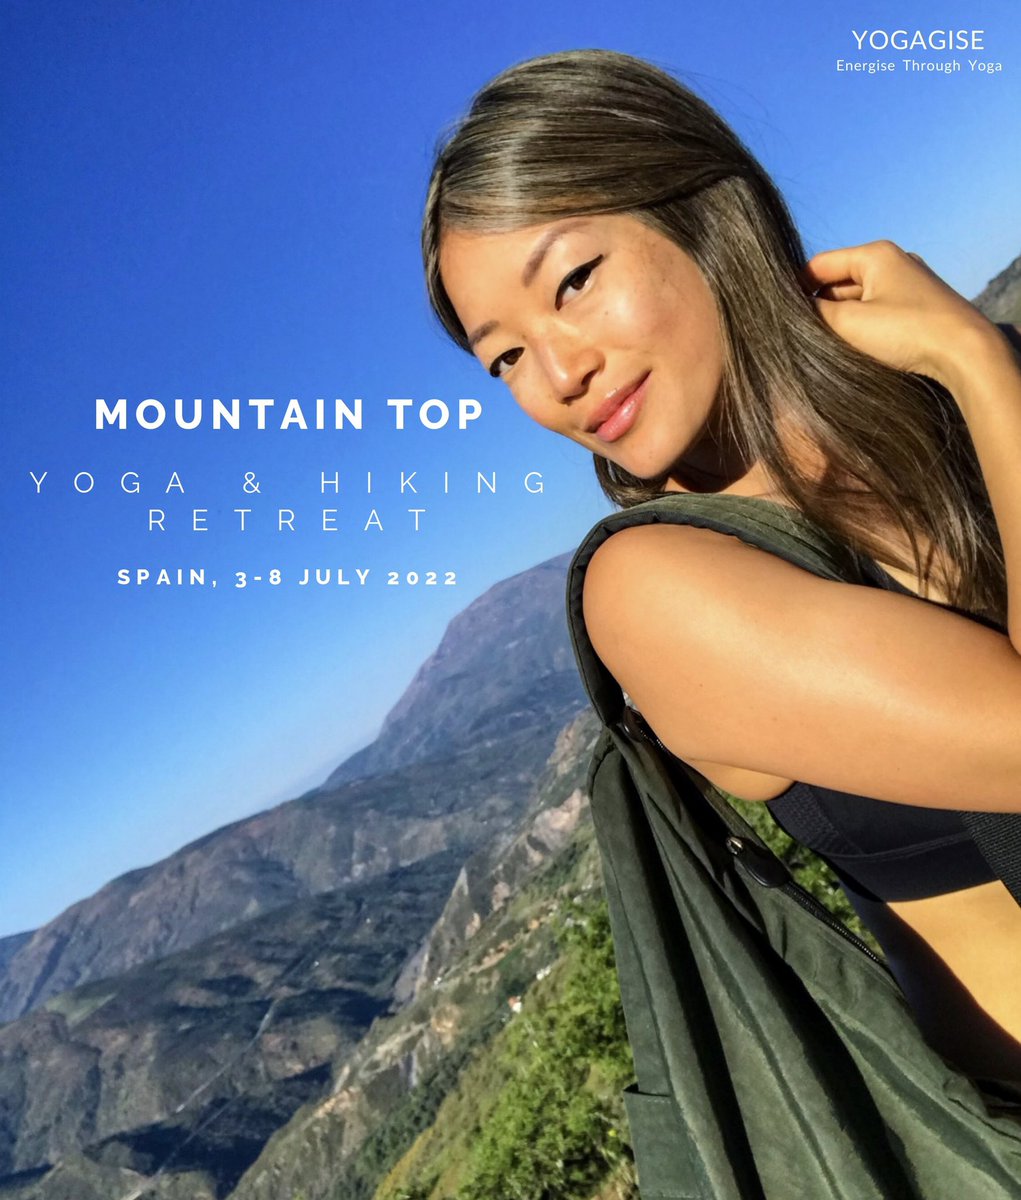 📣 Spaces for my upcoming #MountainTopYogaRetreat are now on sale! Early bird prices are available until 3 February 2022 🇪🇸

From £525pp all inclusive. 

yogagise.com/mountain-top-y…

#yogagise #yogaretreat #yogaretreat2022 #yogaholiday #yogalondon #yogauk #healthretreat #ukyogis